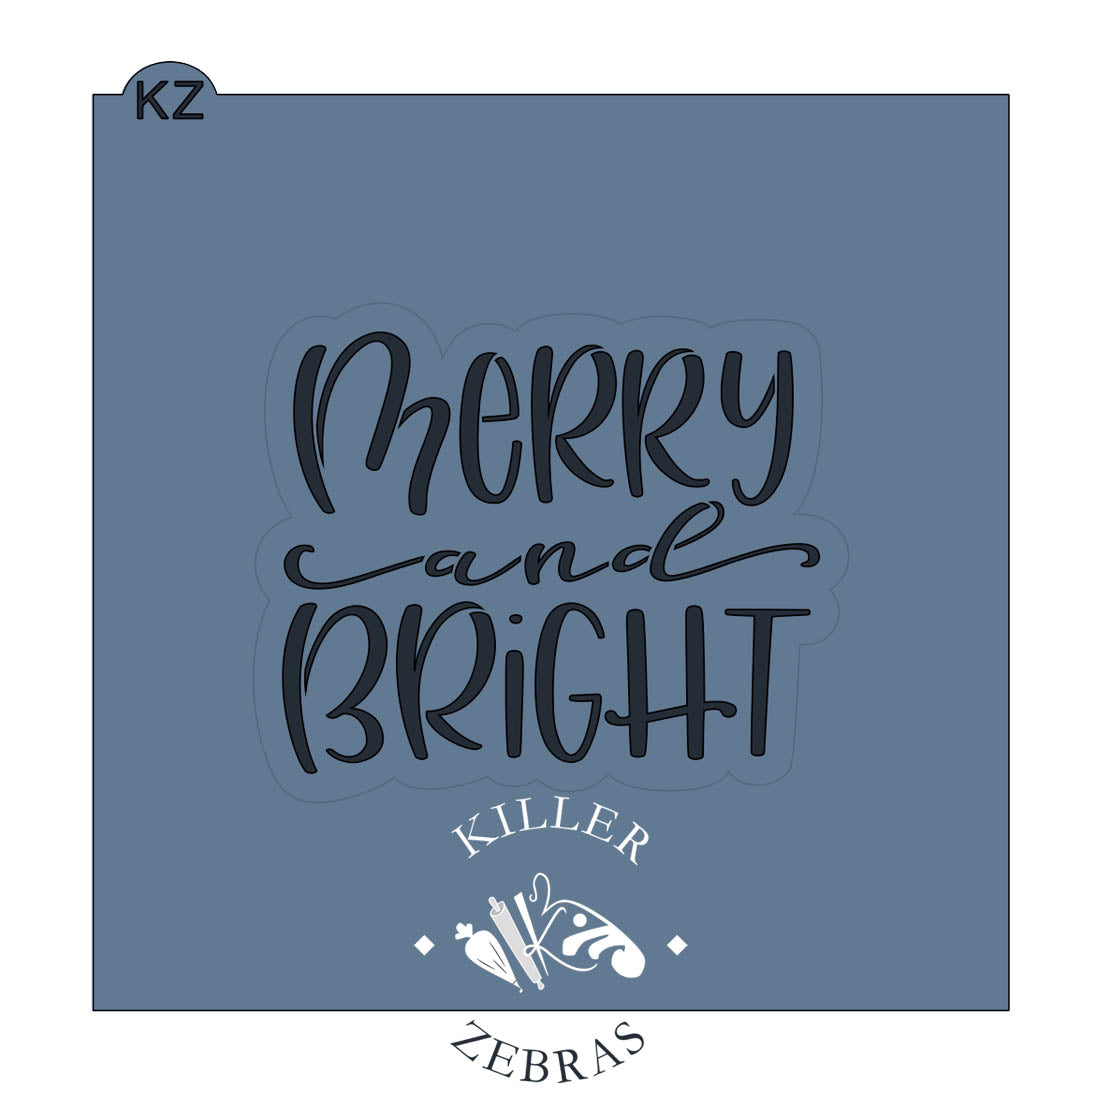 Merry and Bright Hand Lettered